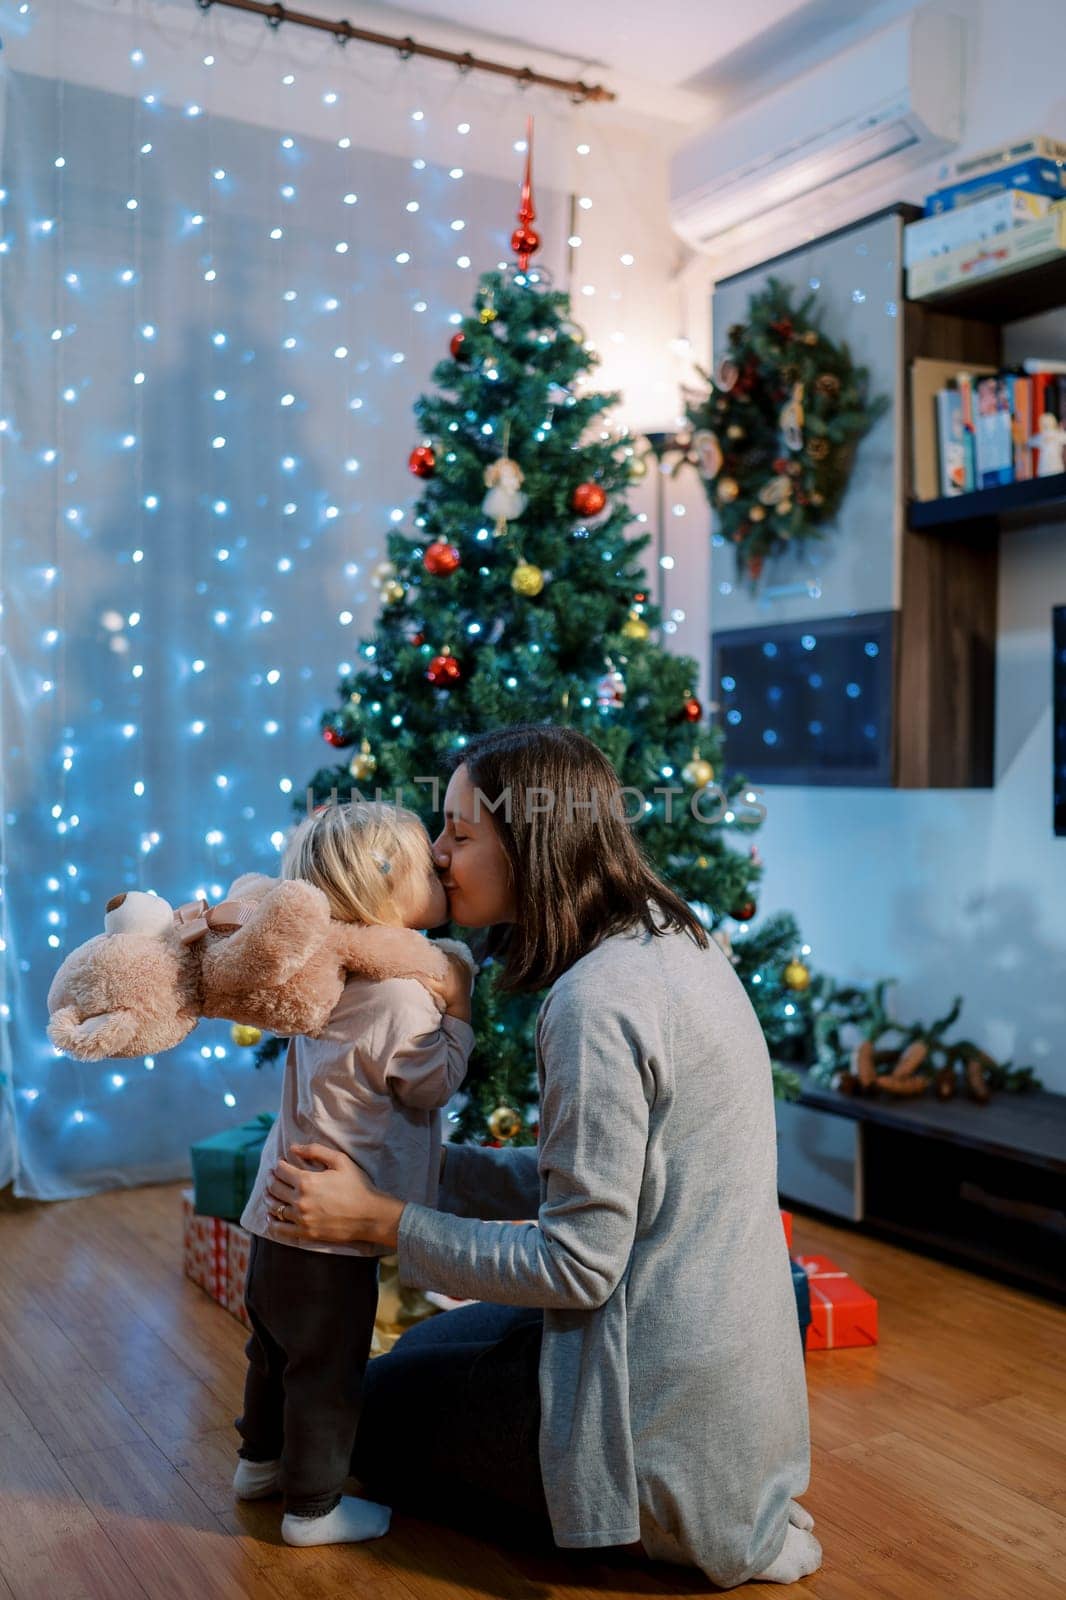 Mom kisses on the cheek a little girl with a teddy bear on her shoulders sitting near a sparkling Christmas tree. High quality photo